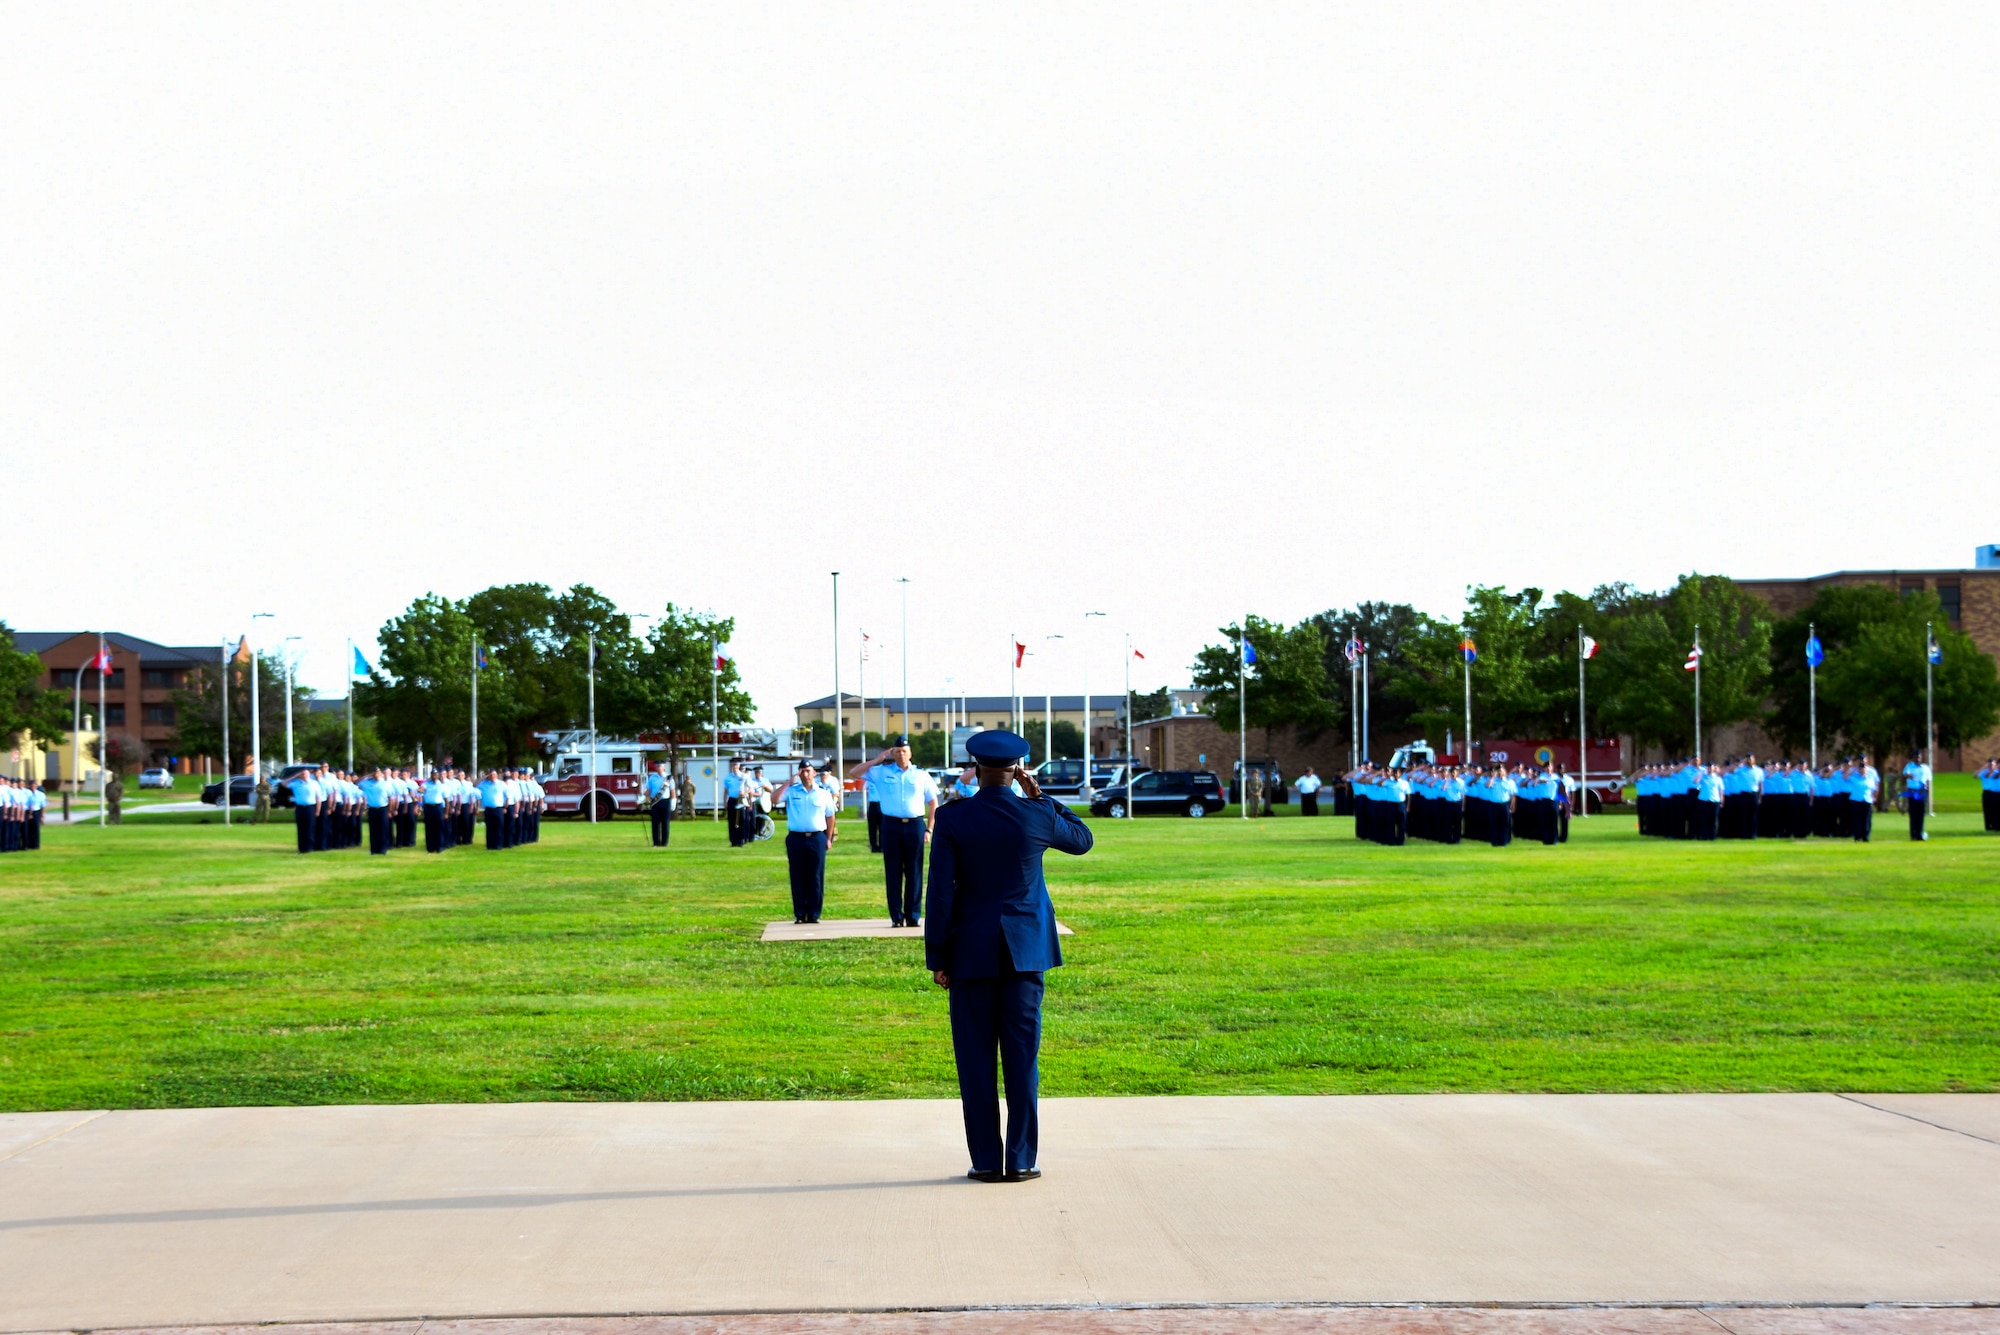 Maj. Gen. Andrea Tullos, 2nd Air Force commander, transfers command of the 82nd Training Wing to Brig. Gen. Lyle K. Drew at Sheppard Air Force Base, Texas, July 15, 2021. The 82nd TRW is the largest technical training installation in the Air Force.